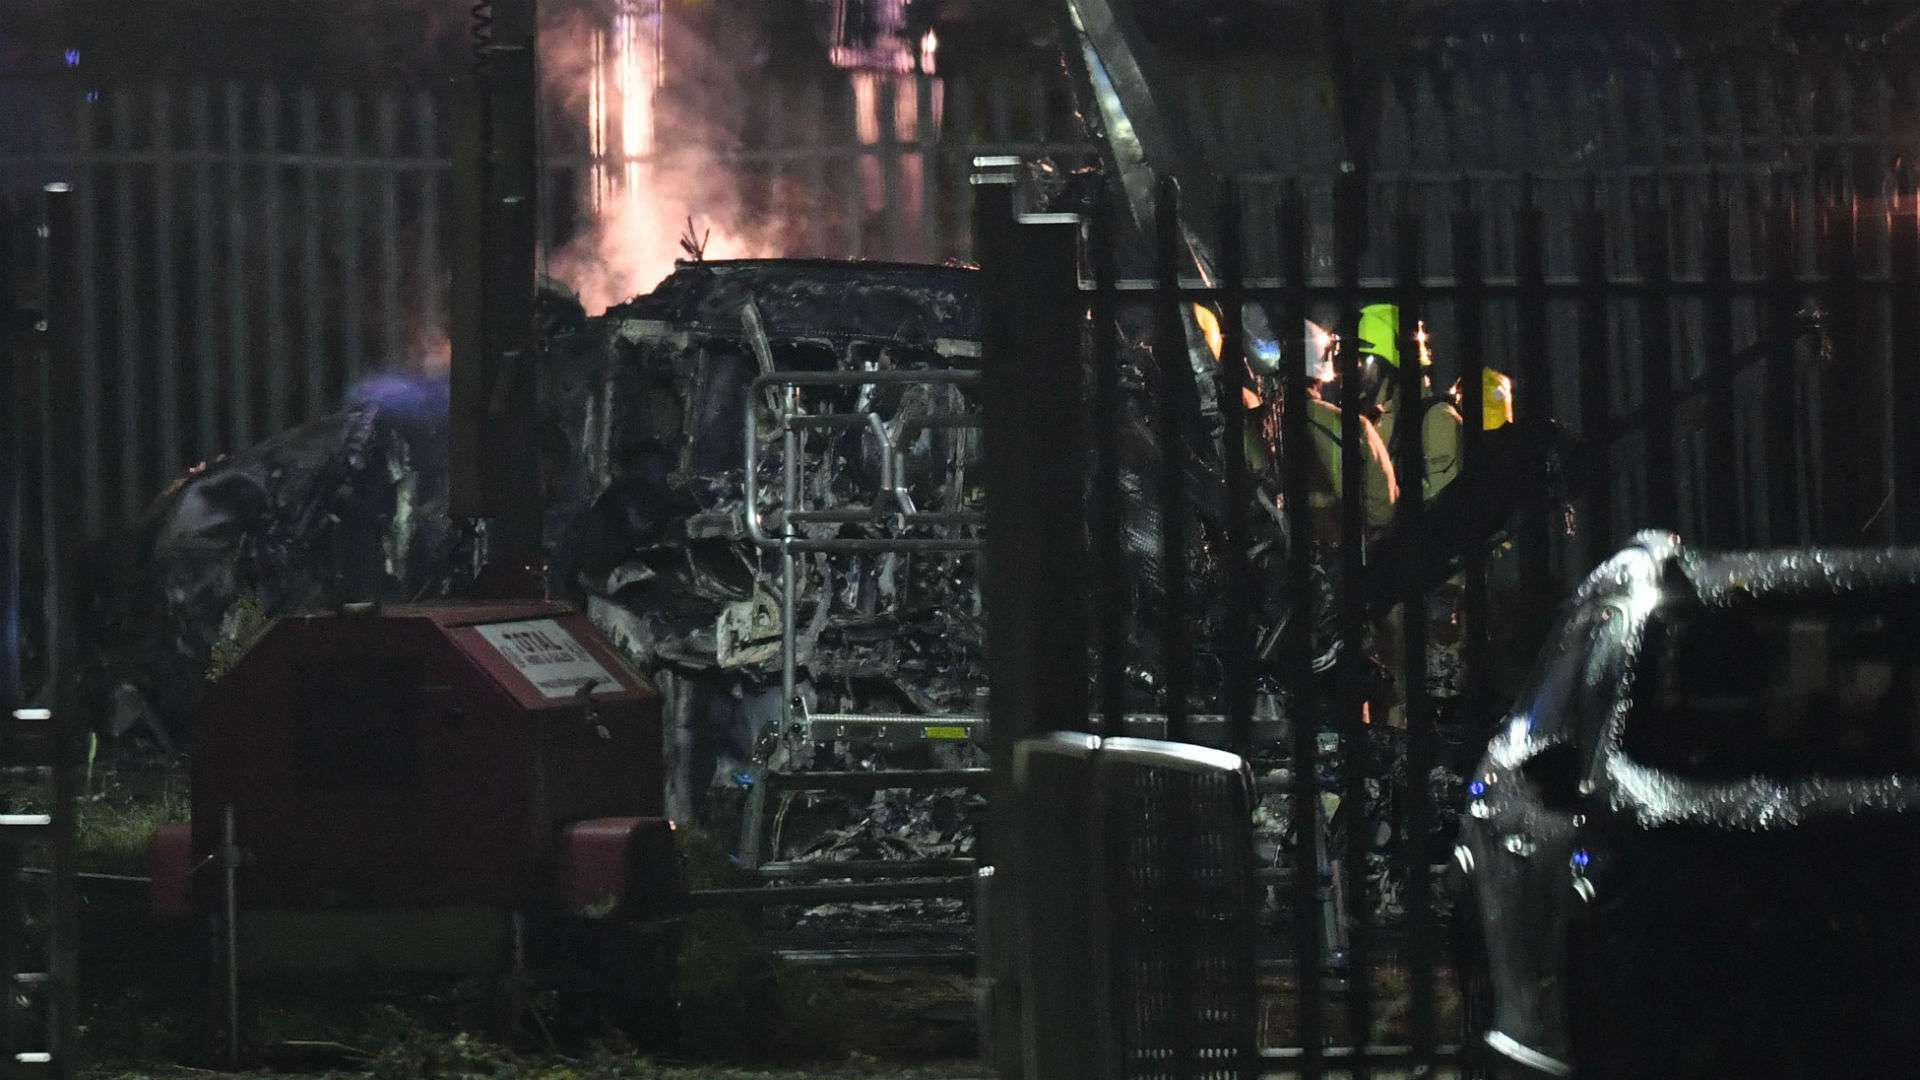 Leicester helicopter crash scene 2018